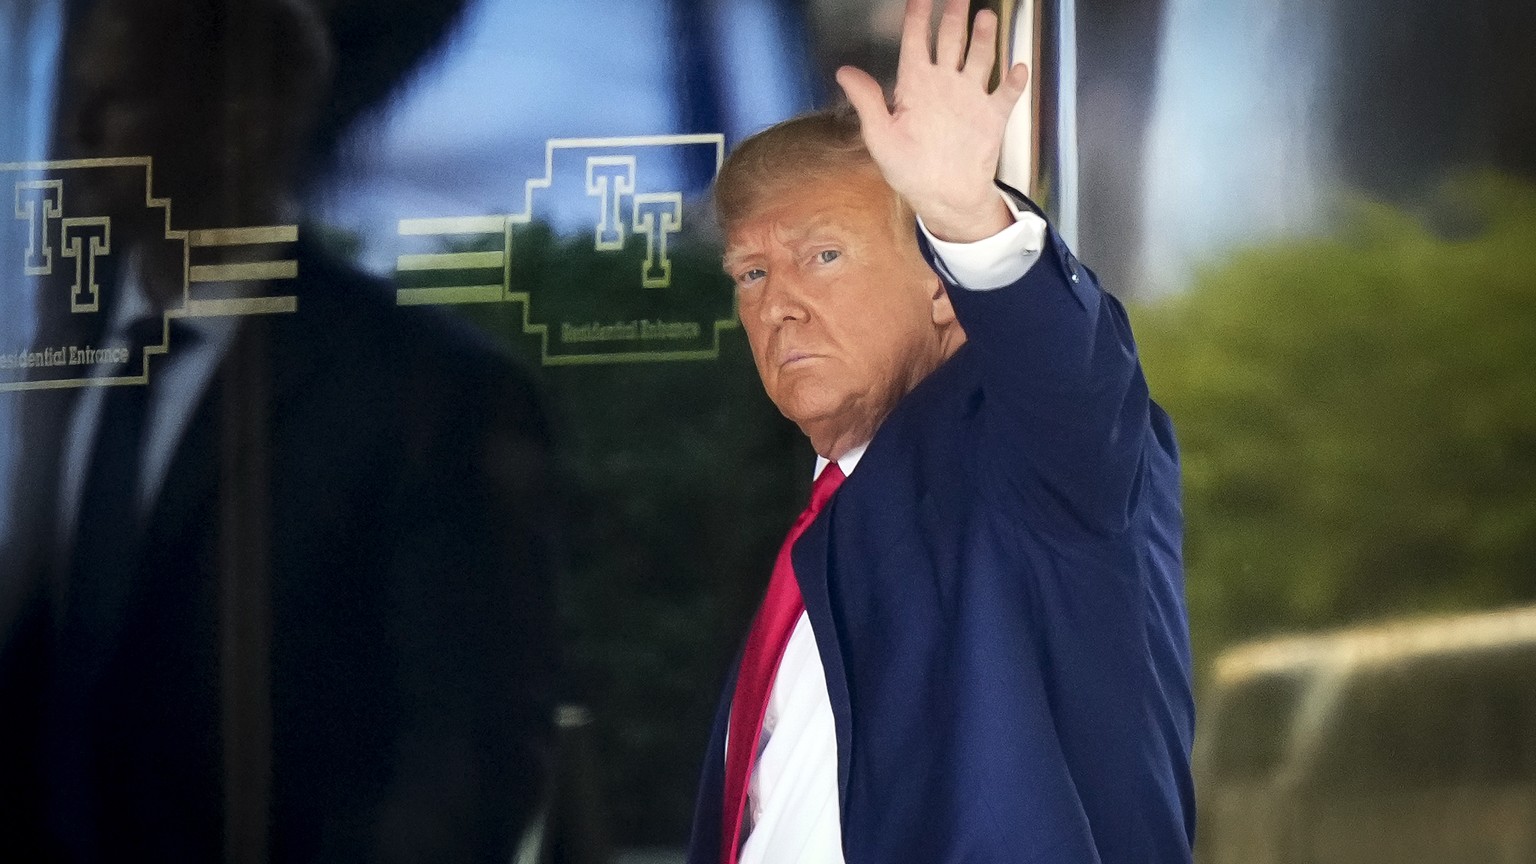 Former President Donald Trump arrives at Trump Tower in New York, Monday, April 3, 2023. Trump is expected to be booked and arraigned the following day on charges arising from hush money payments duri ...